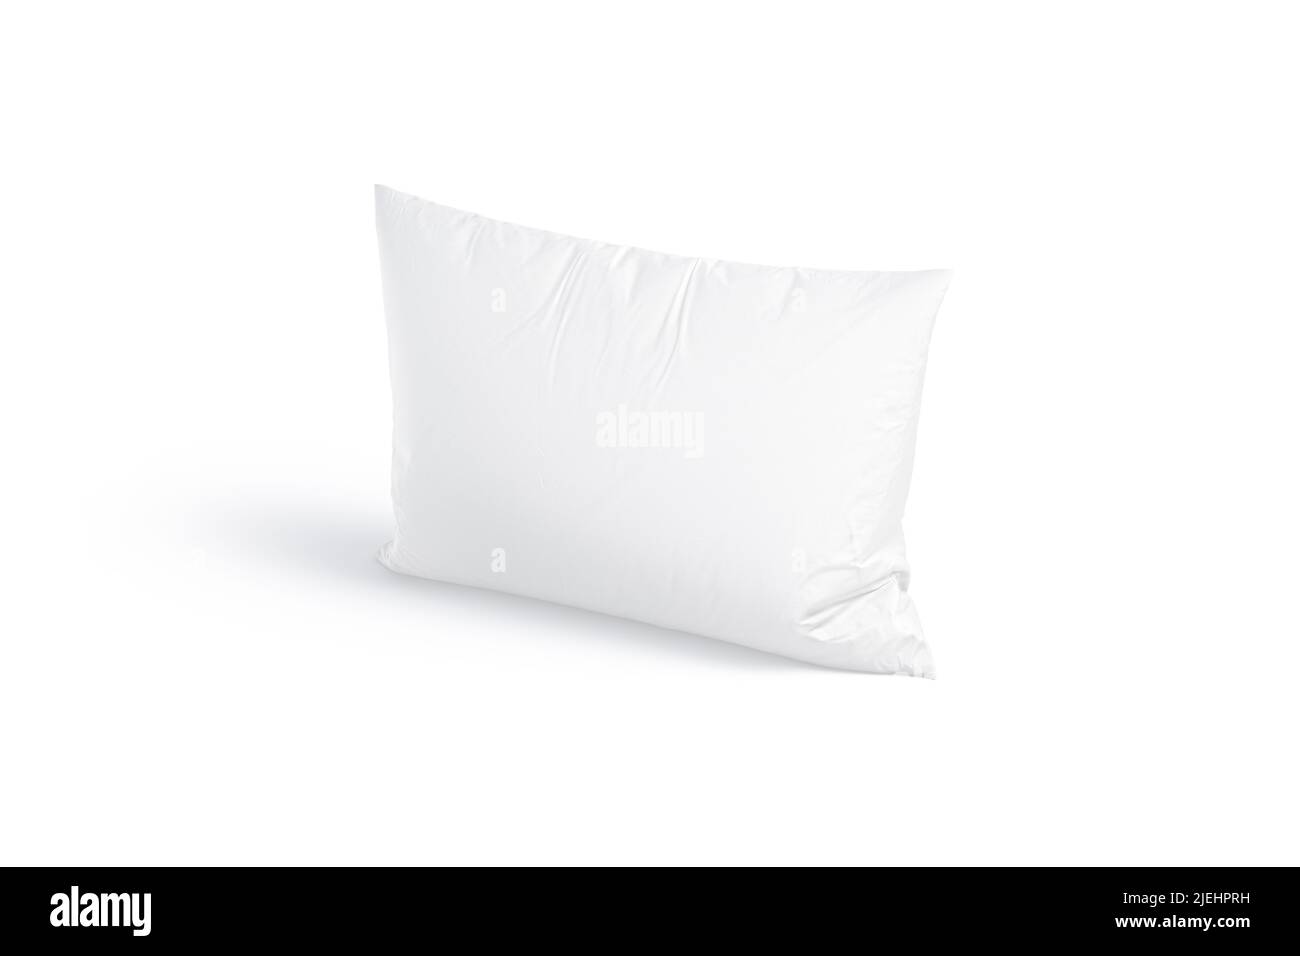 Blank white rectangular pillow mock up stand, side view Stock Photo